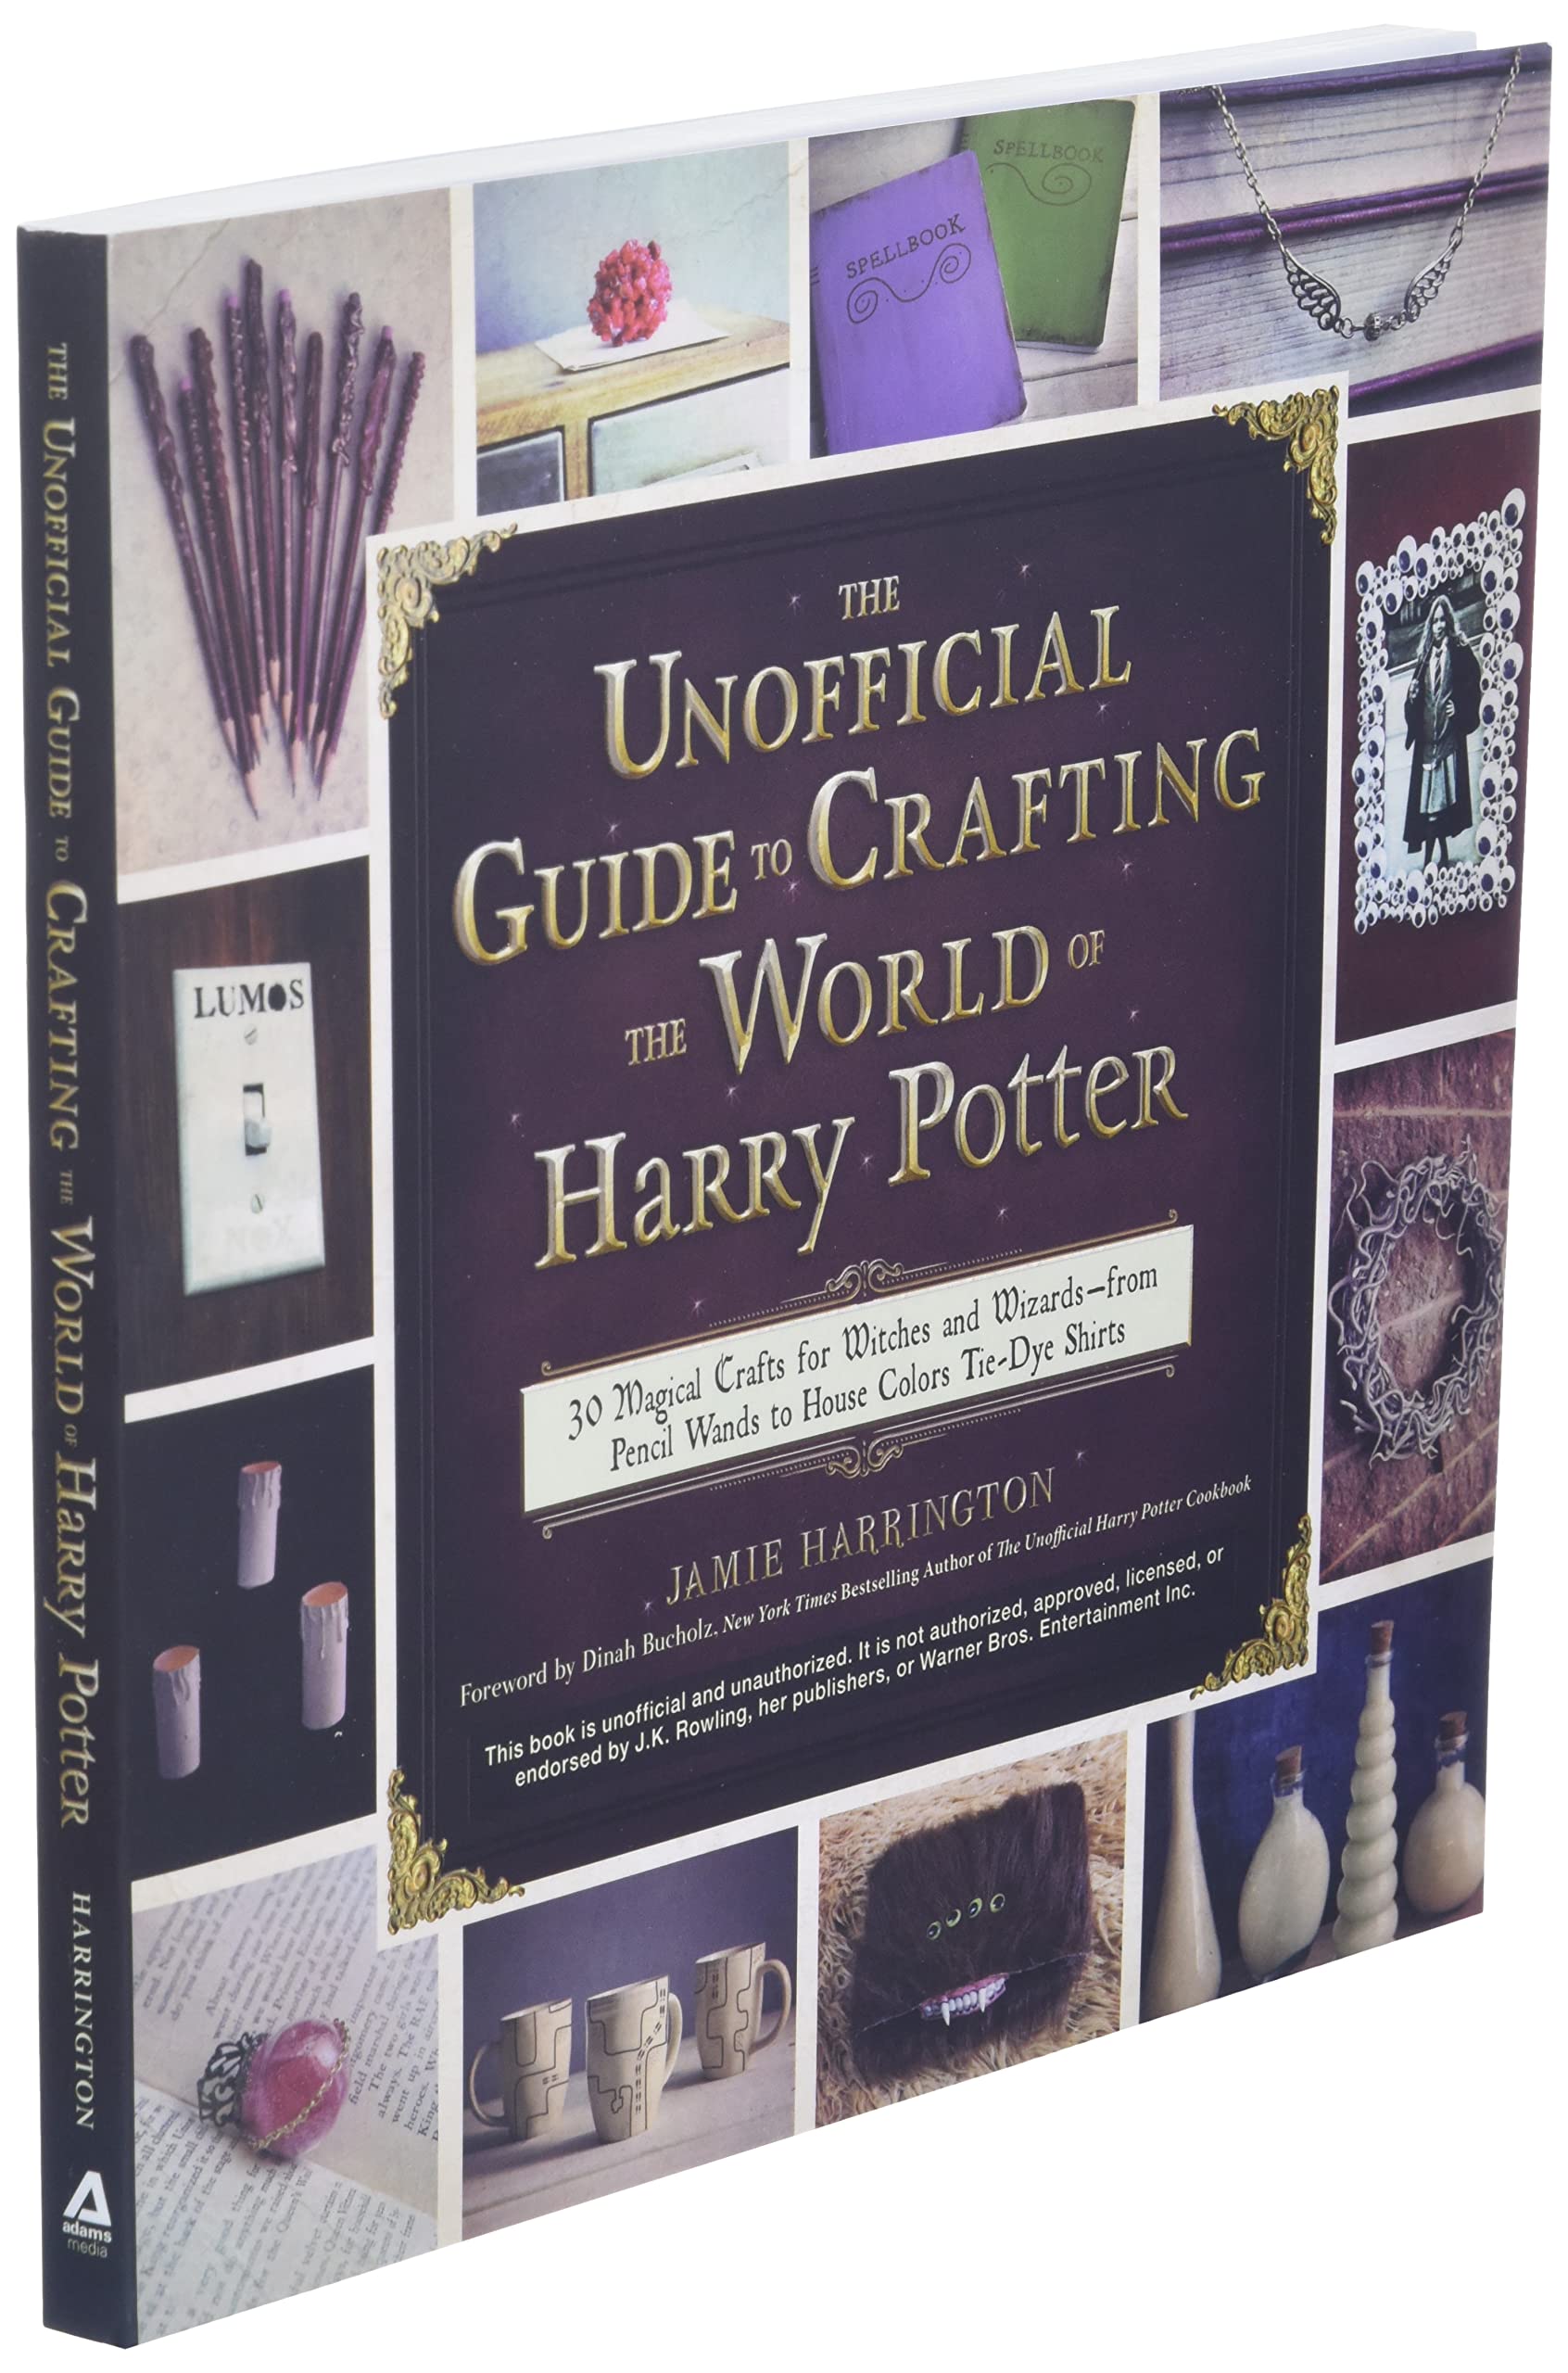 The Unofficial Guide to Crafting the World of Harry Potter: 30 Magical Crafts for Witches and Wizards―from Pencil Wands to House Colors Tie-Dye Shirts